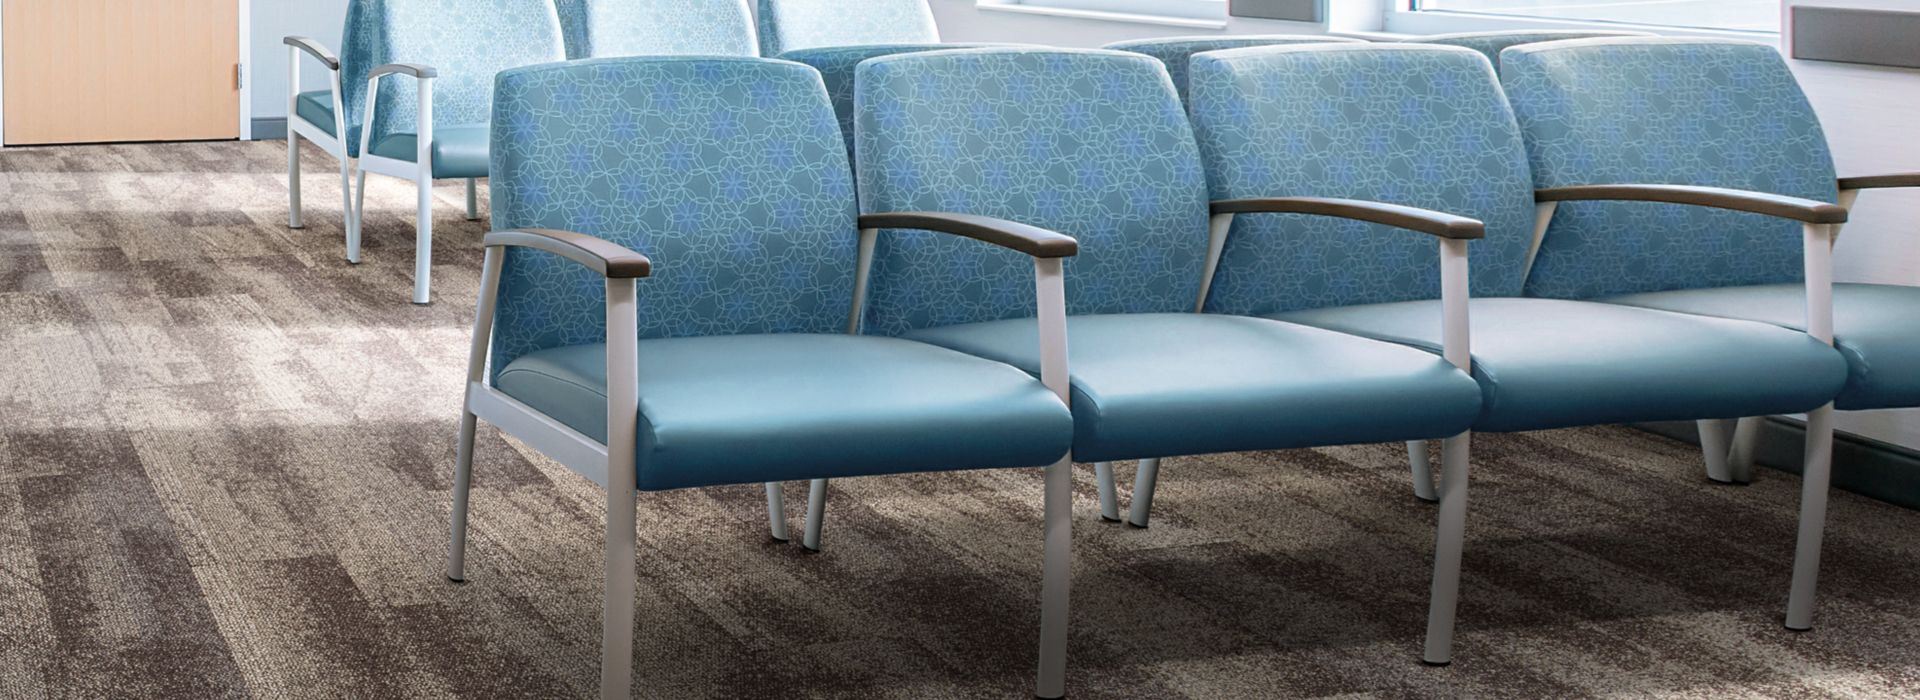 Interface Neighborhood Smooth plank carpet tile in waiting room with blue chairs